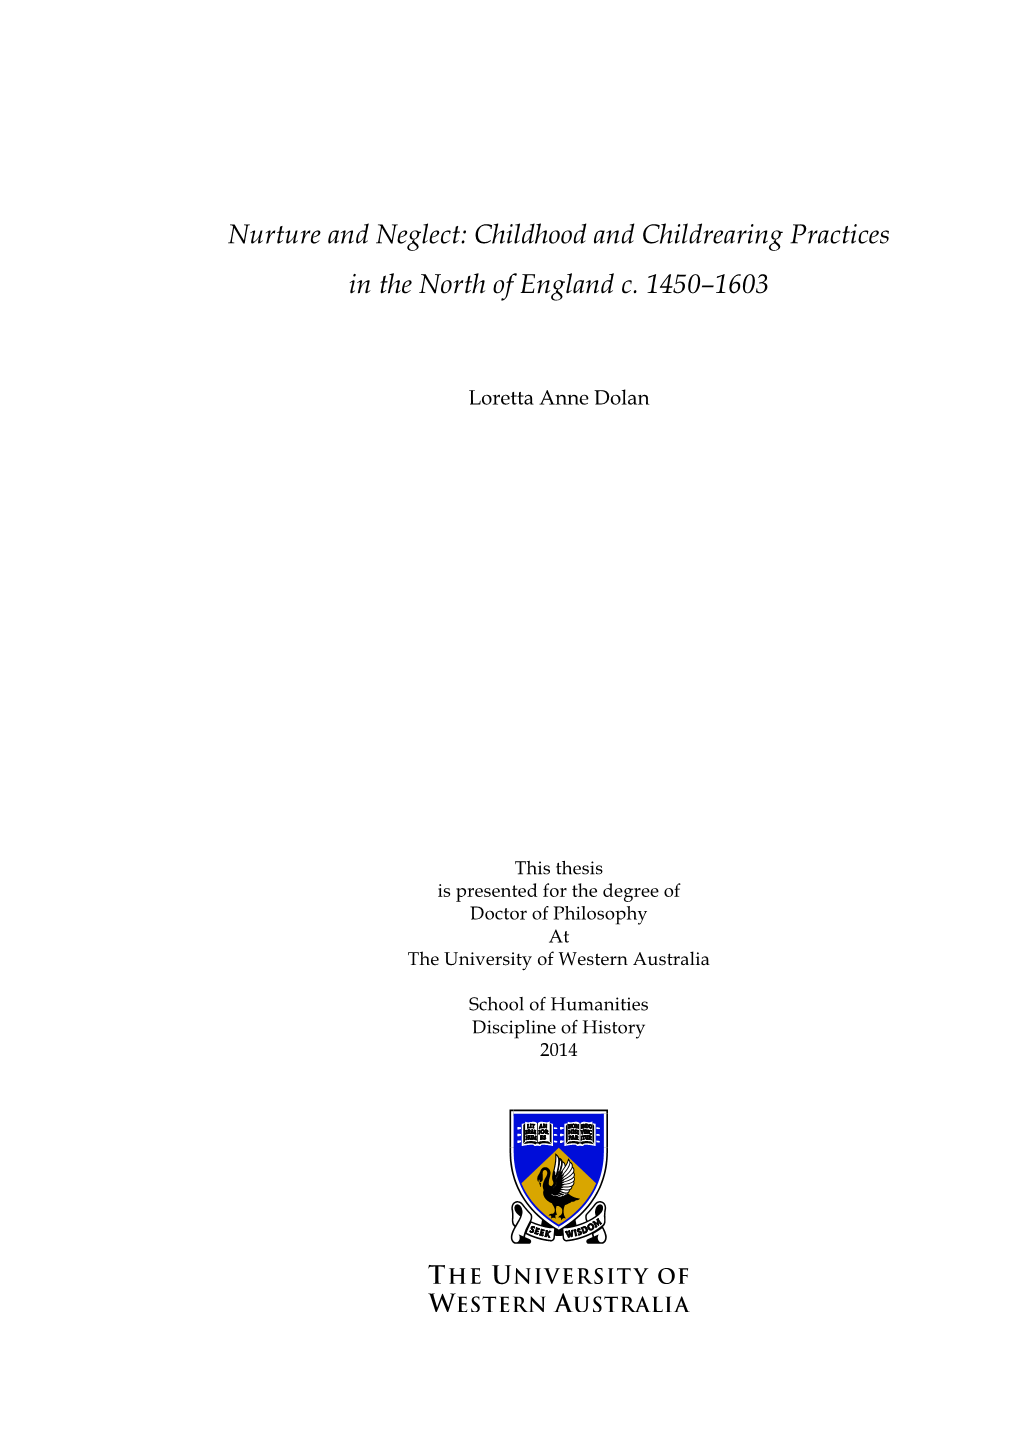 Childhood and Childrearing Practices in the North of England C. 1450–1603